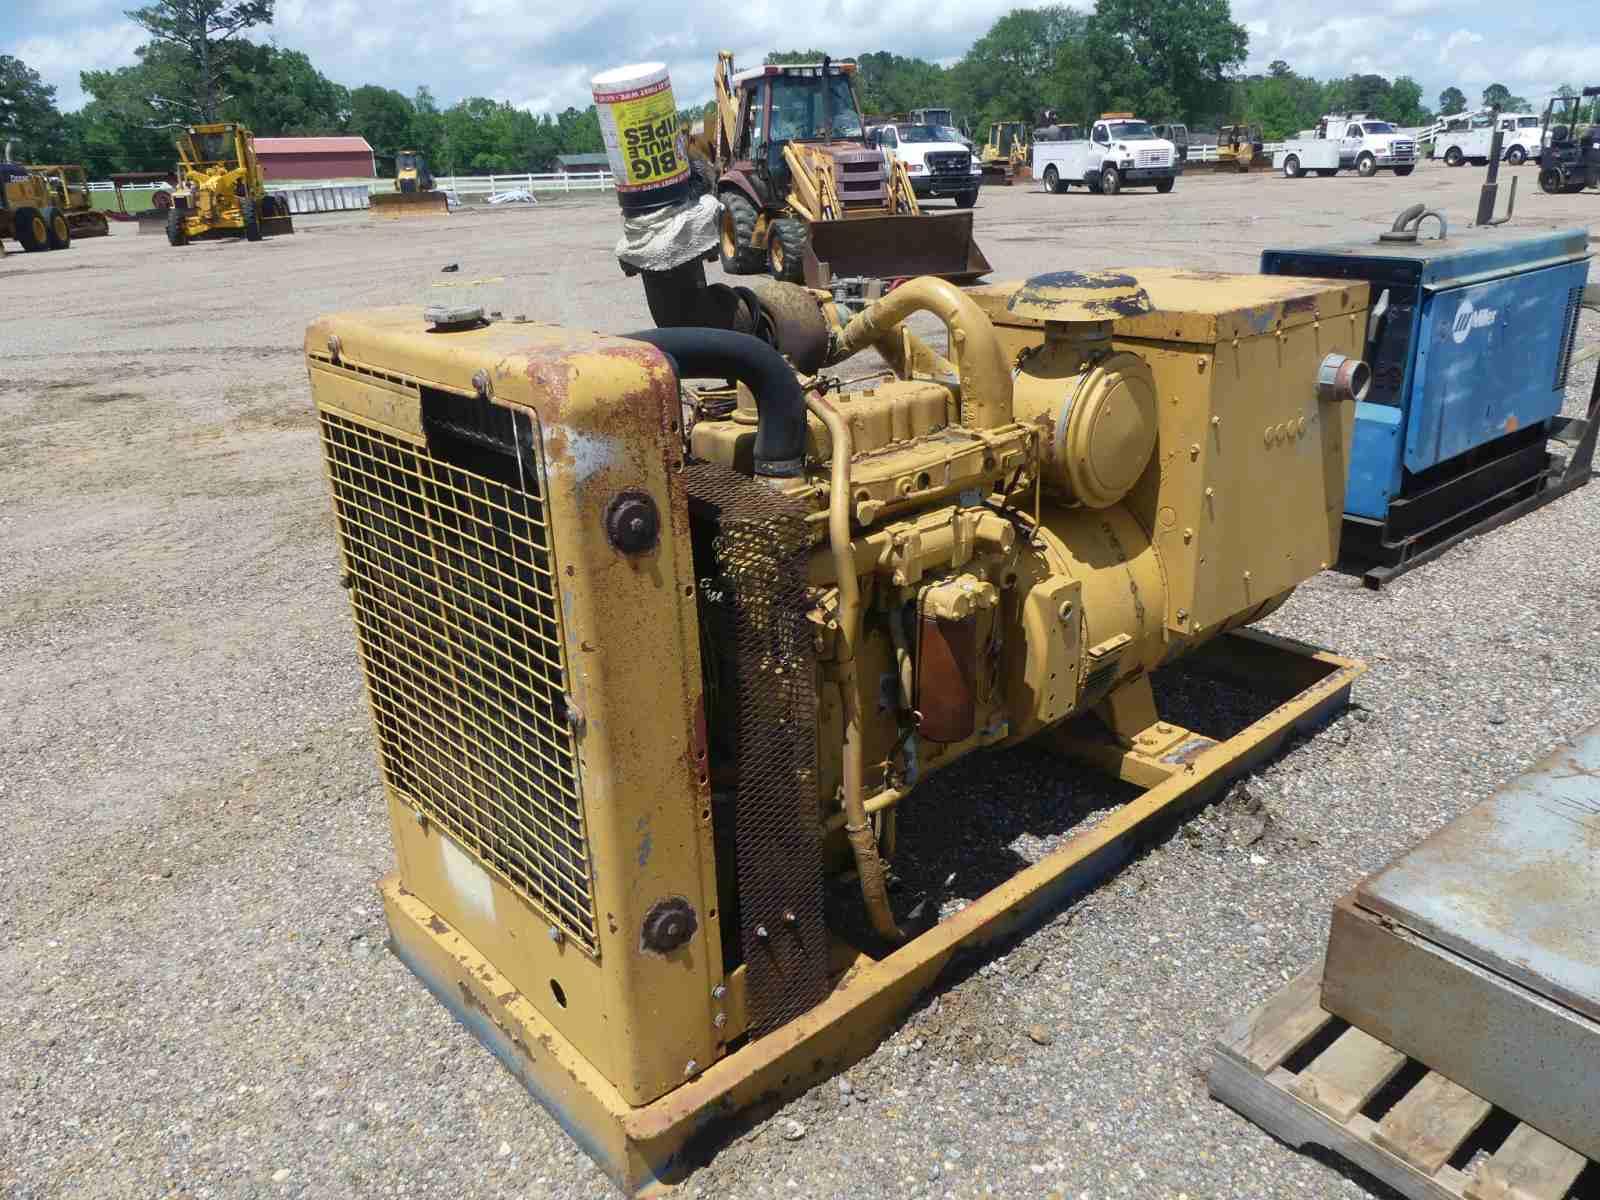 Cat SCR4 100KW Generator w/ Control Panel: Cat 3304 Diesel Eng., 3-phase